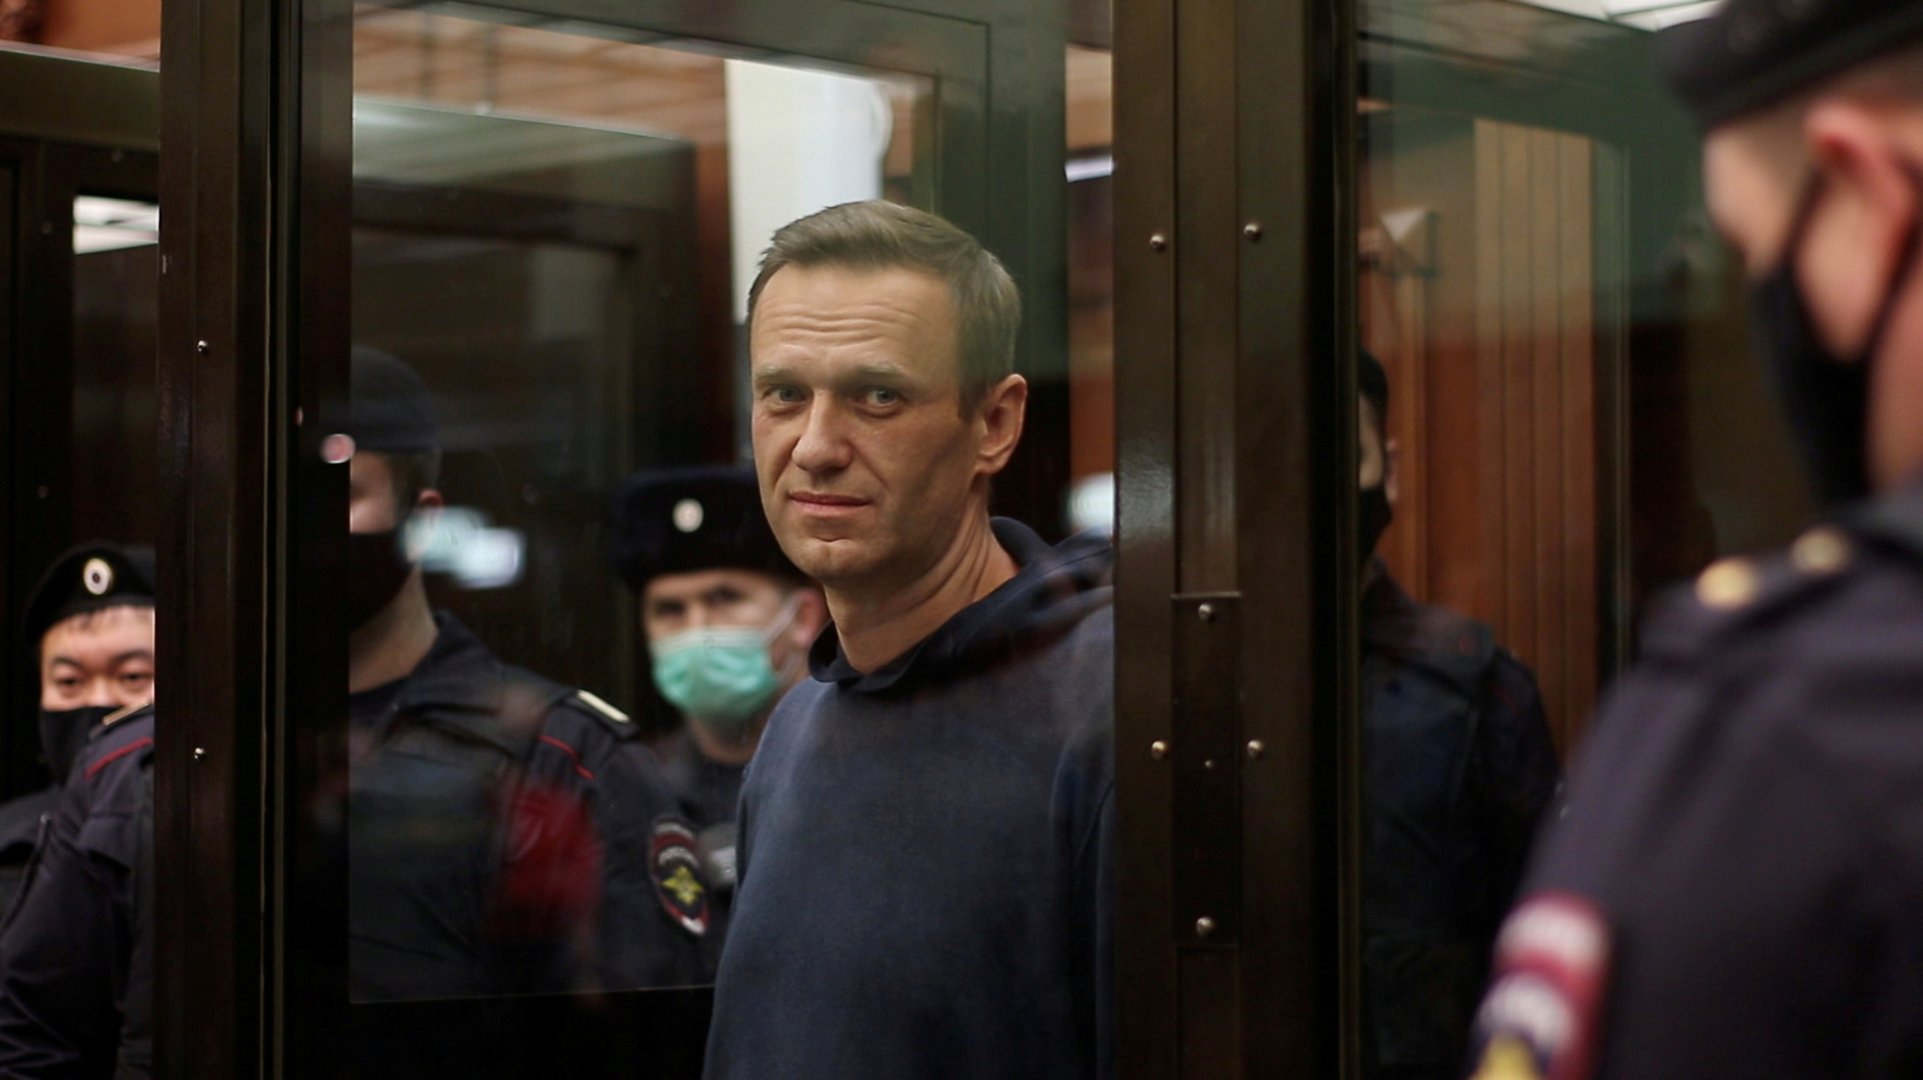 image Russia hits Navalny with new charge that could add to jail term